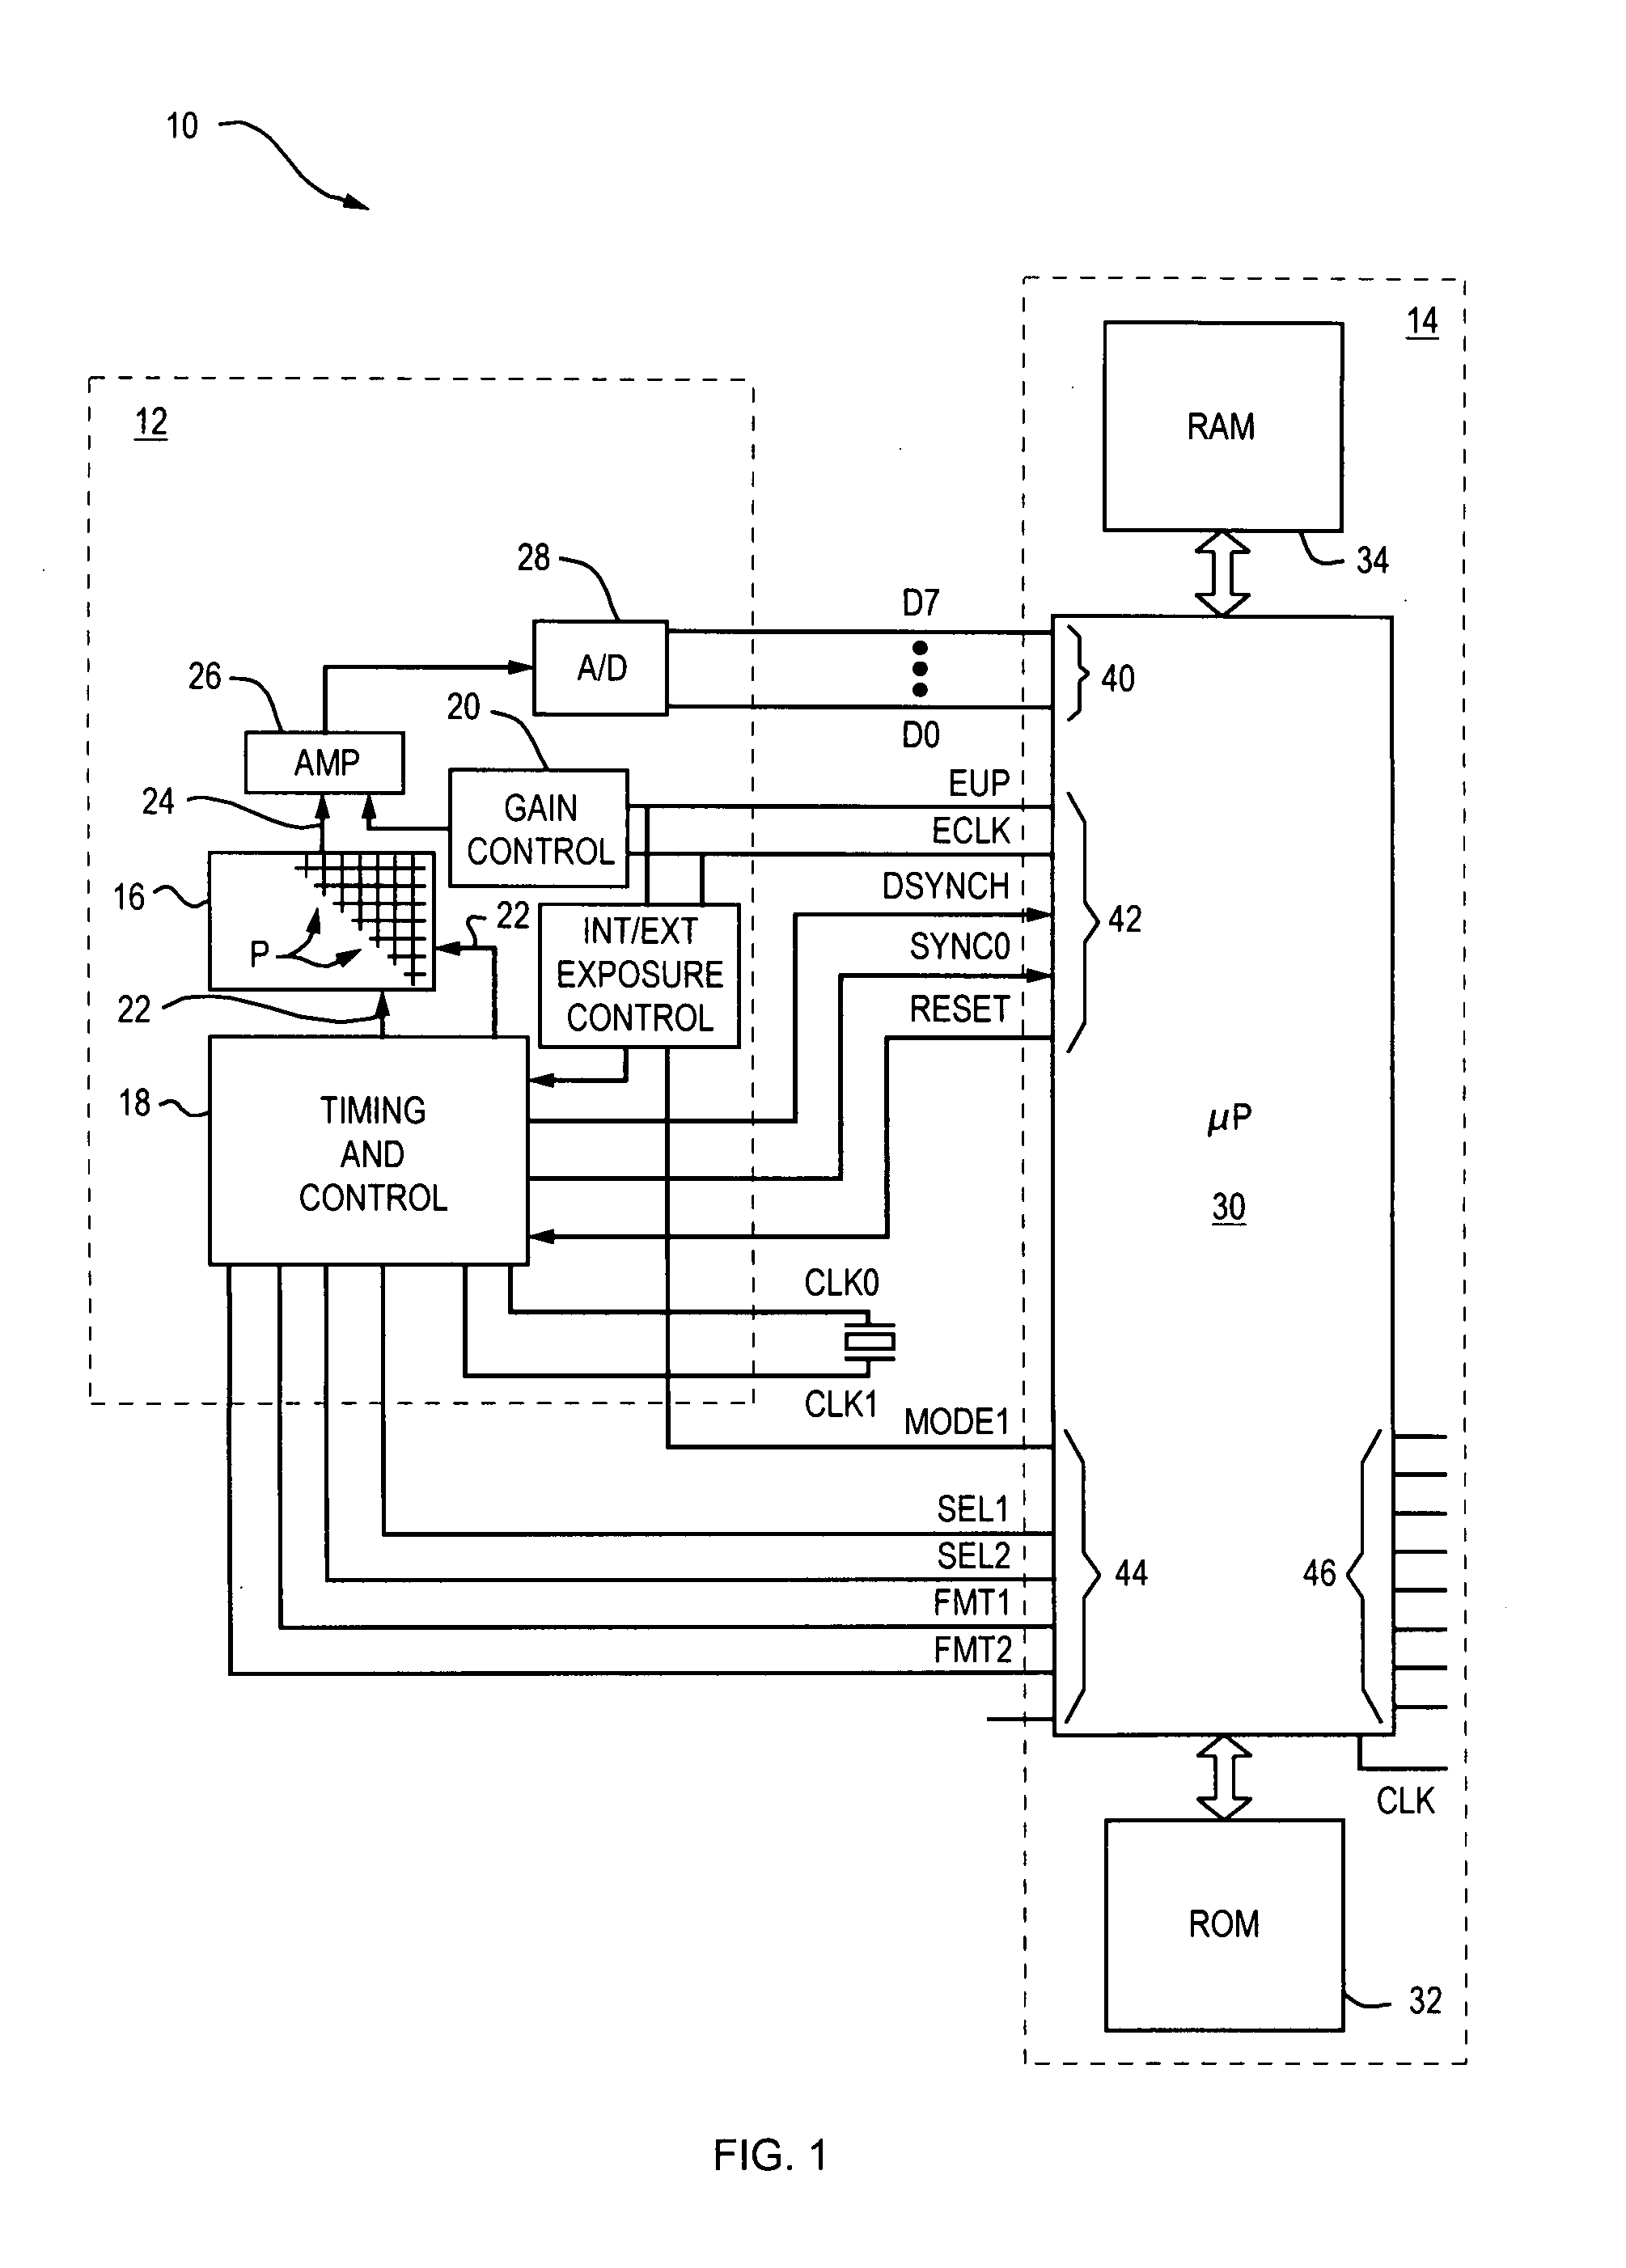 Method and apparatus for compensating for fixed pattern noise in an imaging system